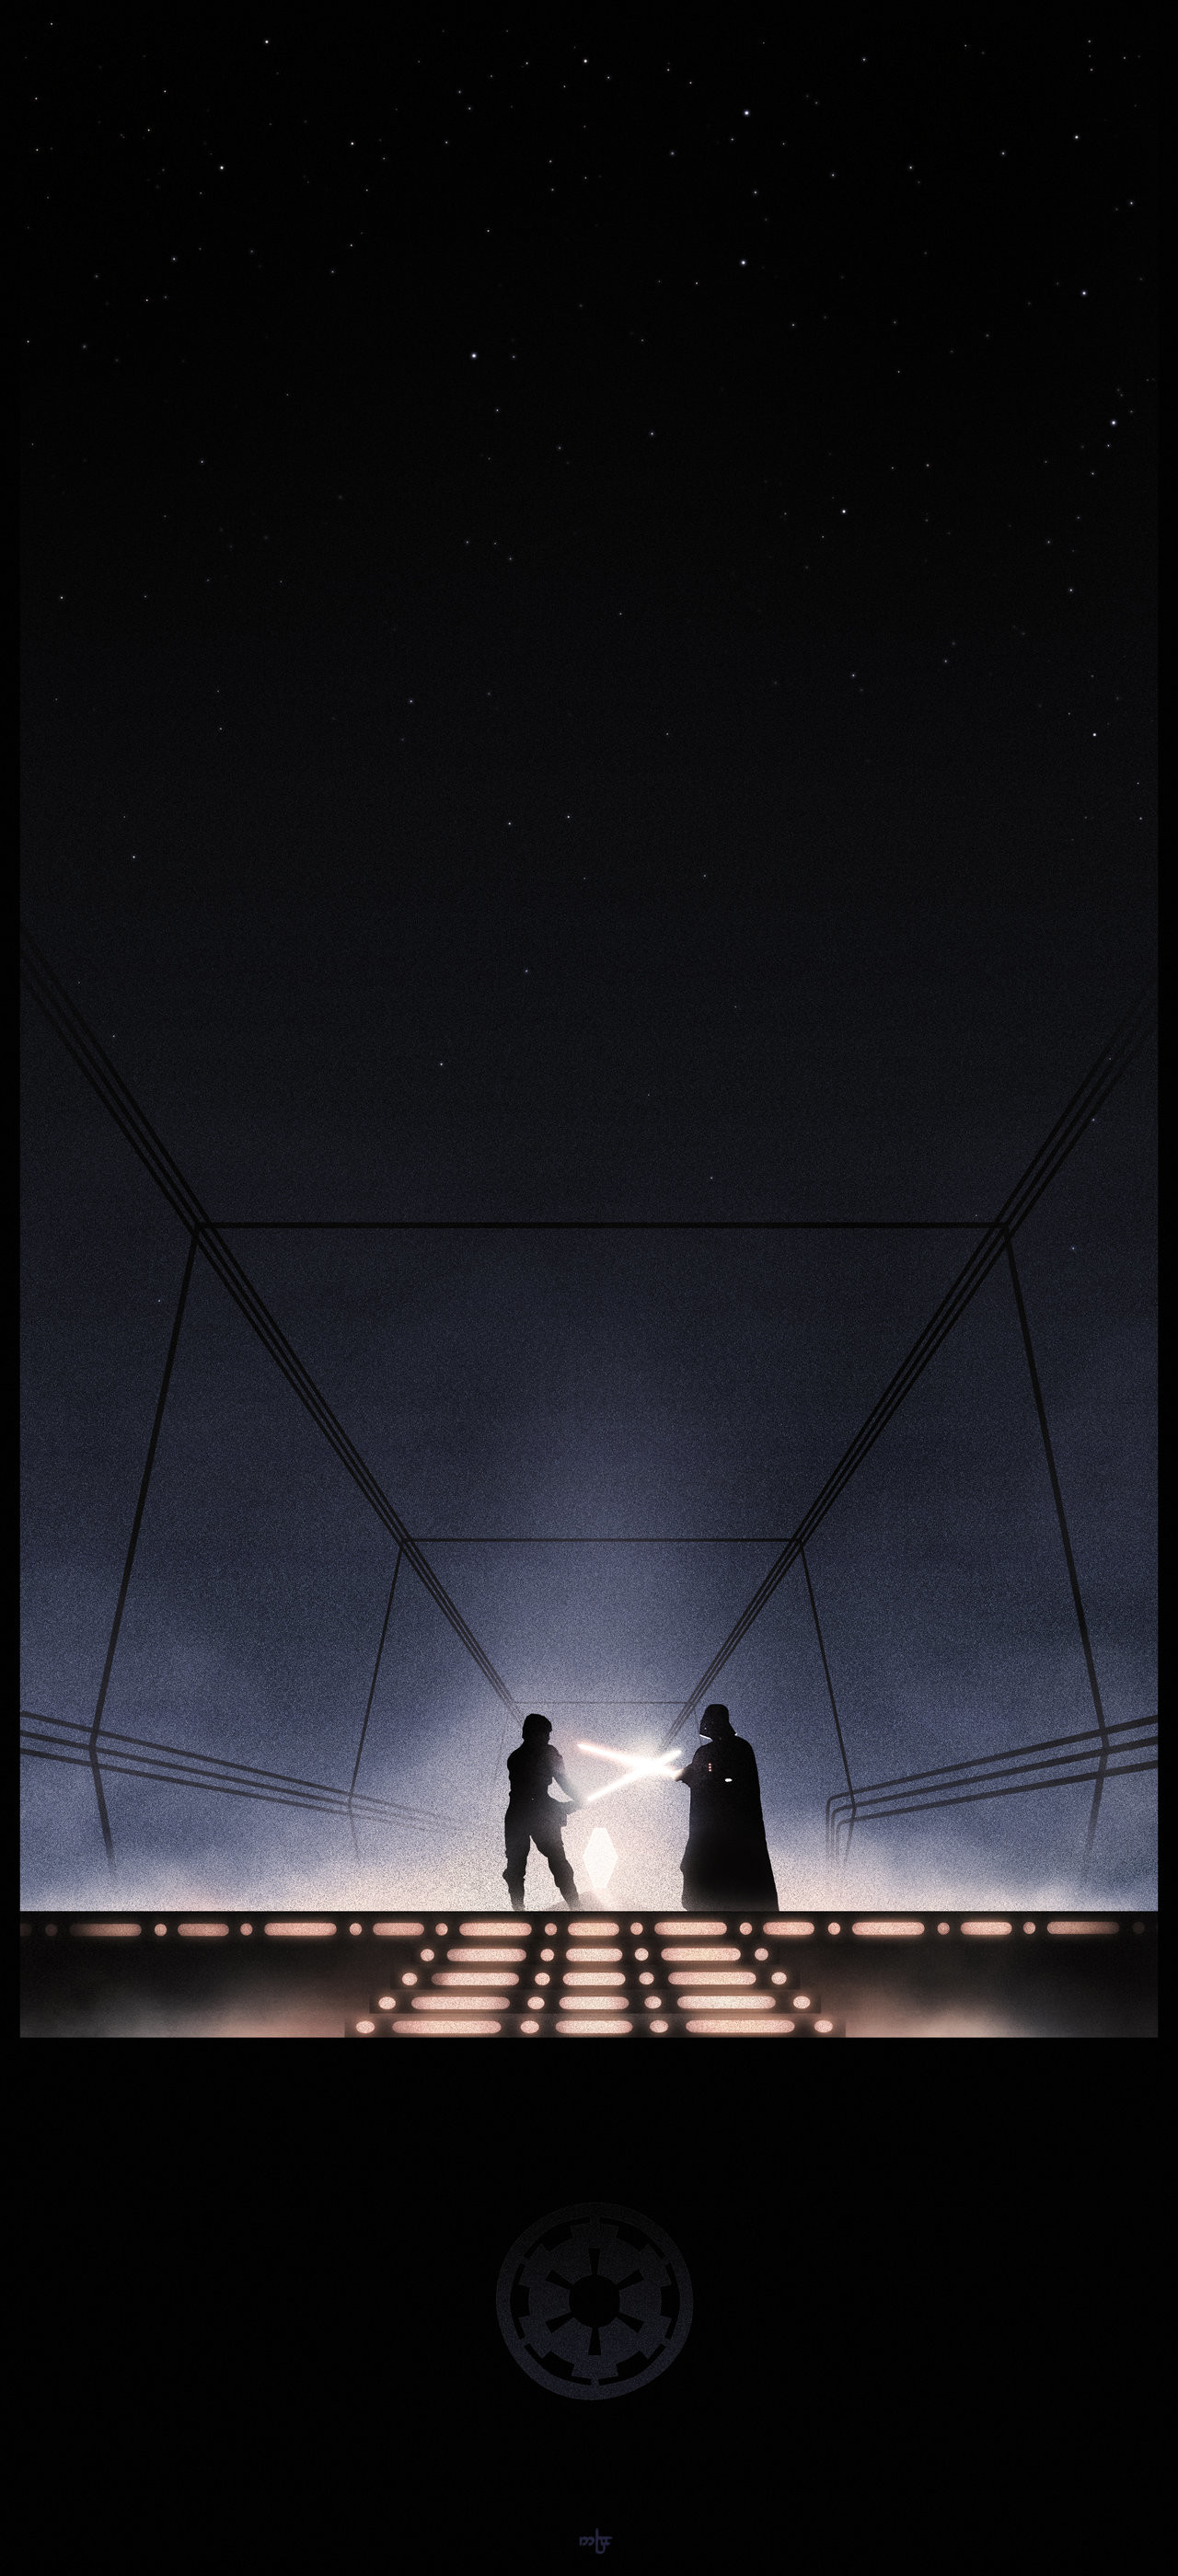 1280x2800 ... Star Wars Episode V: The Empire Strikes Back by Noble--6